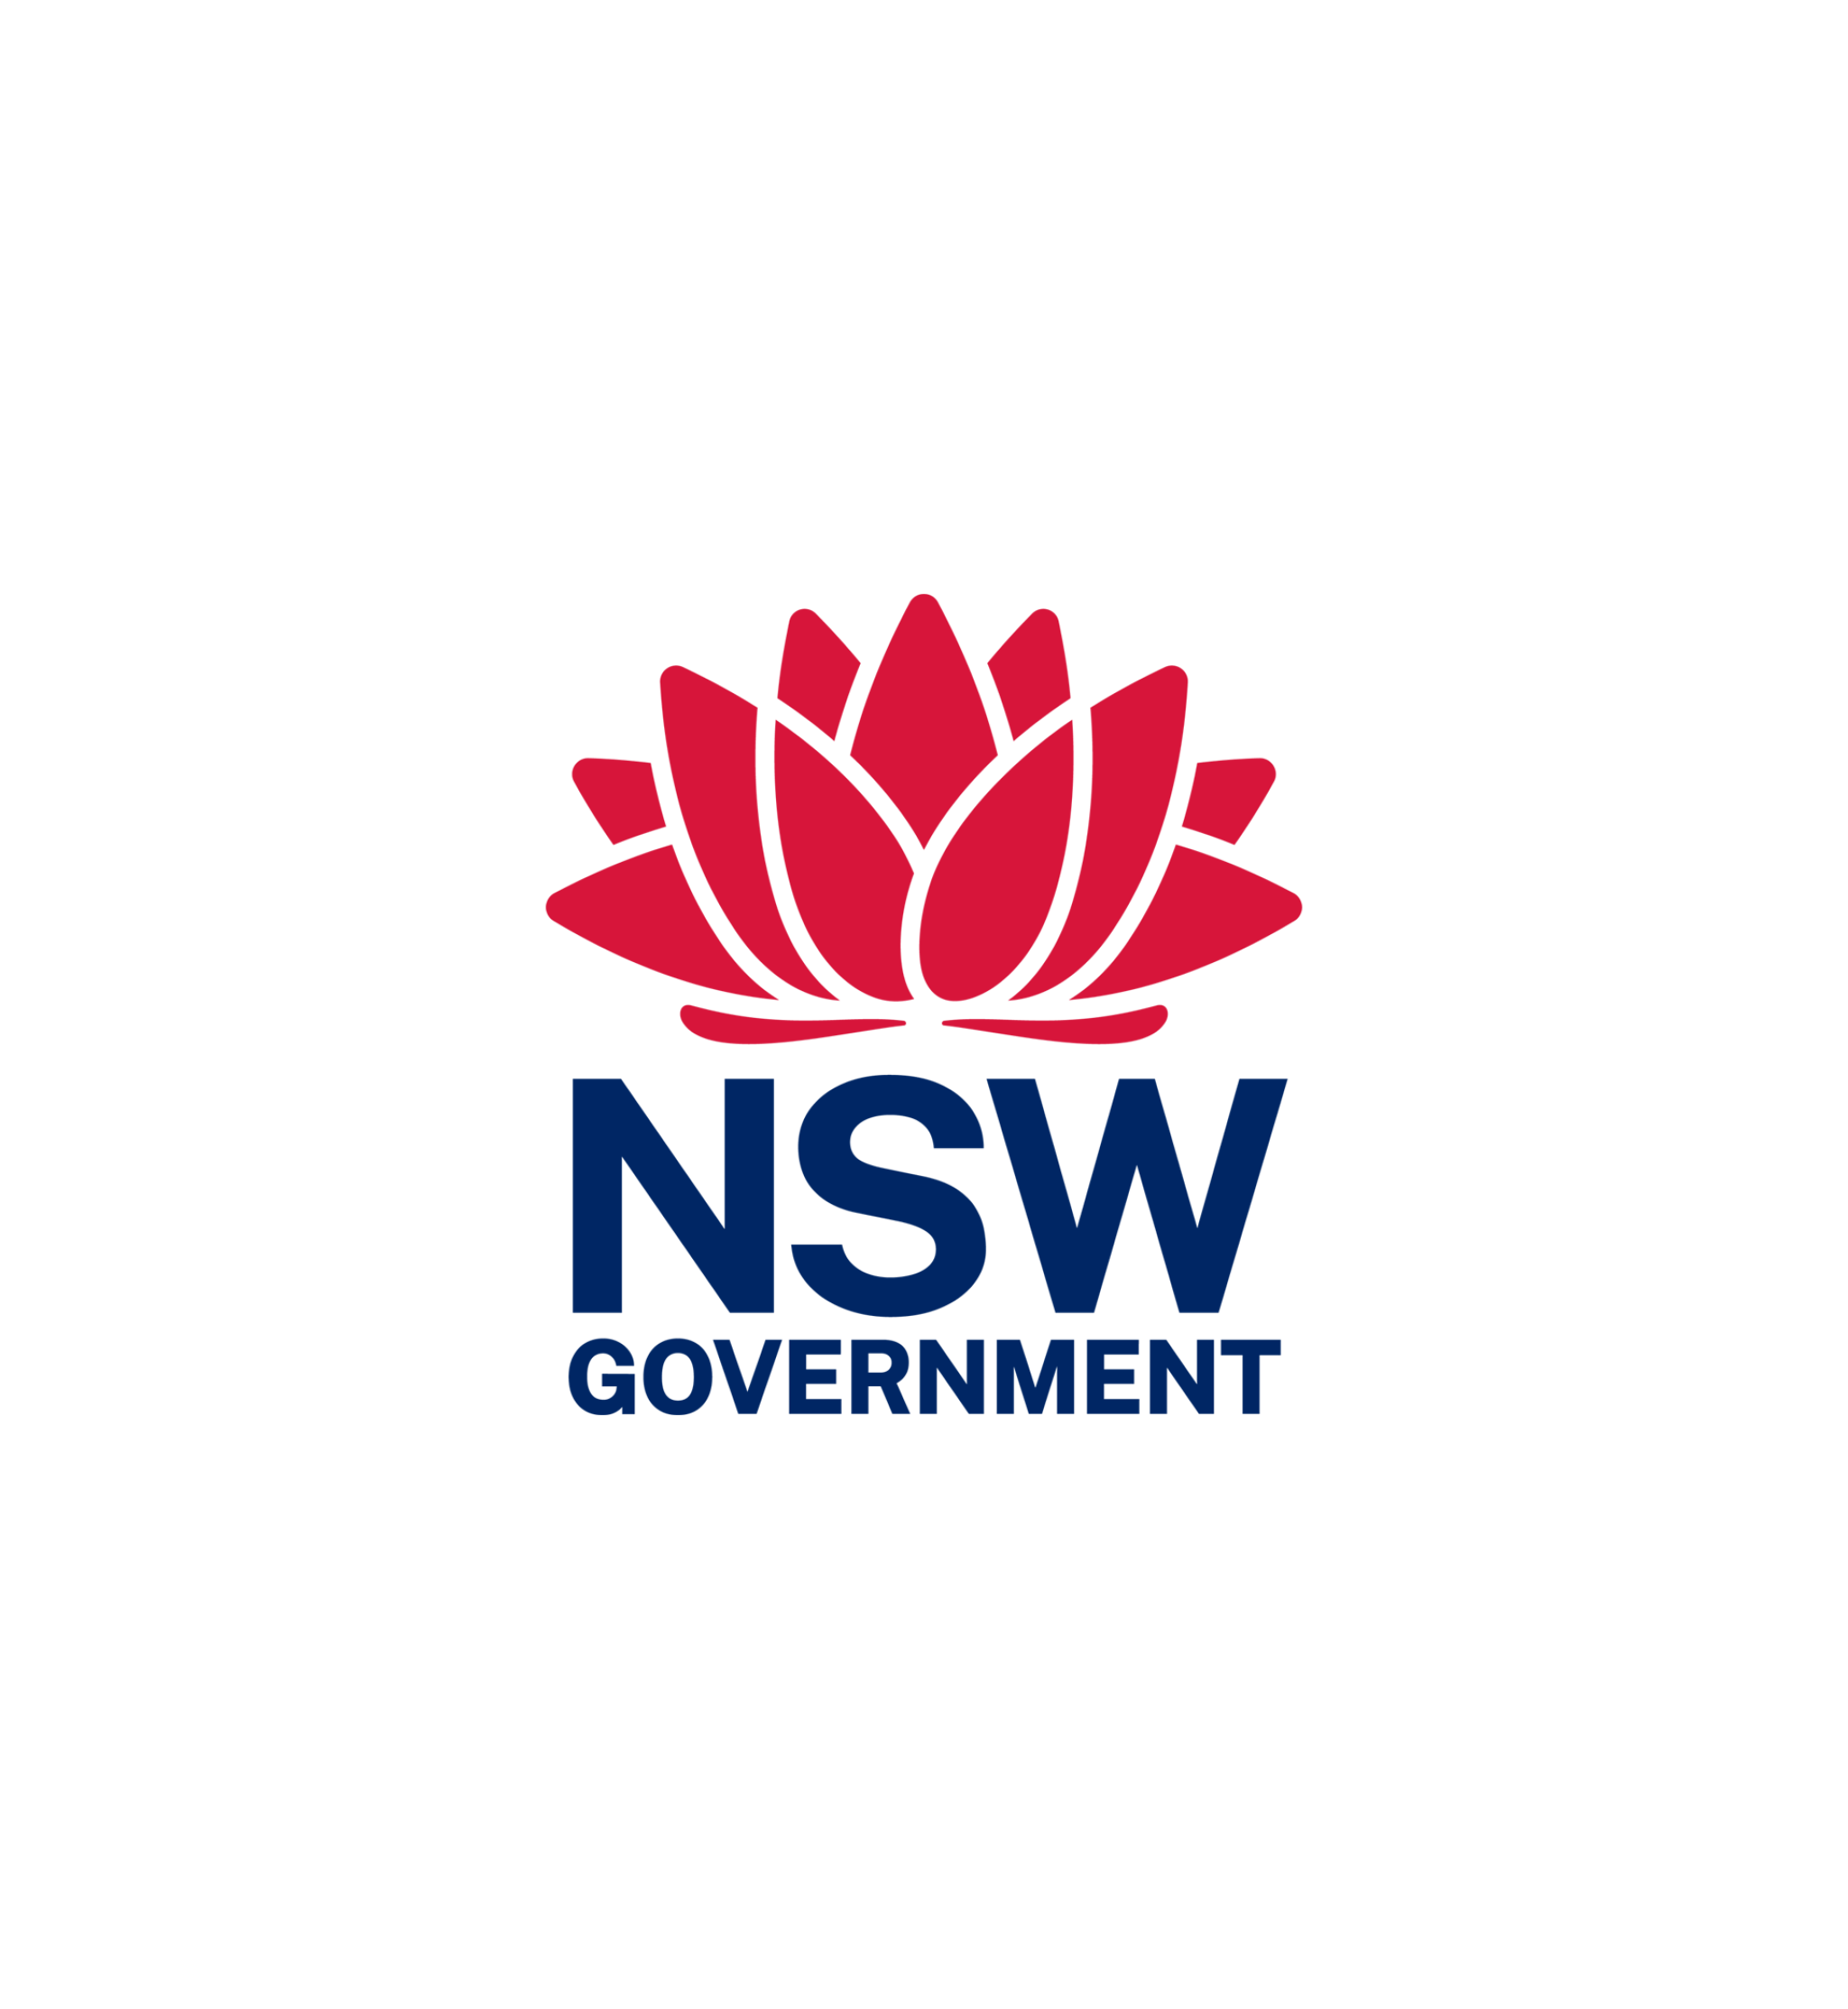 This program is supported by the NSW Government through Create NSW.